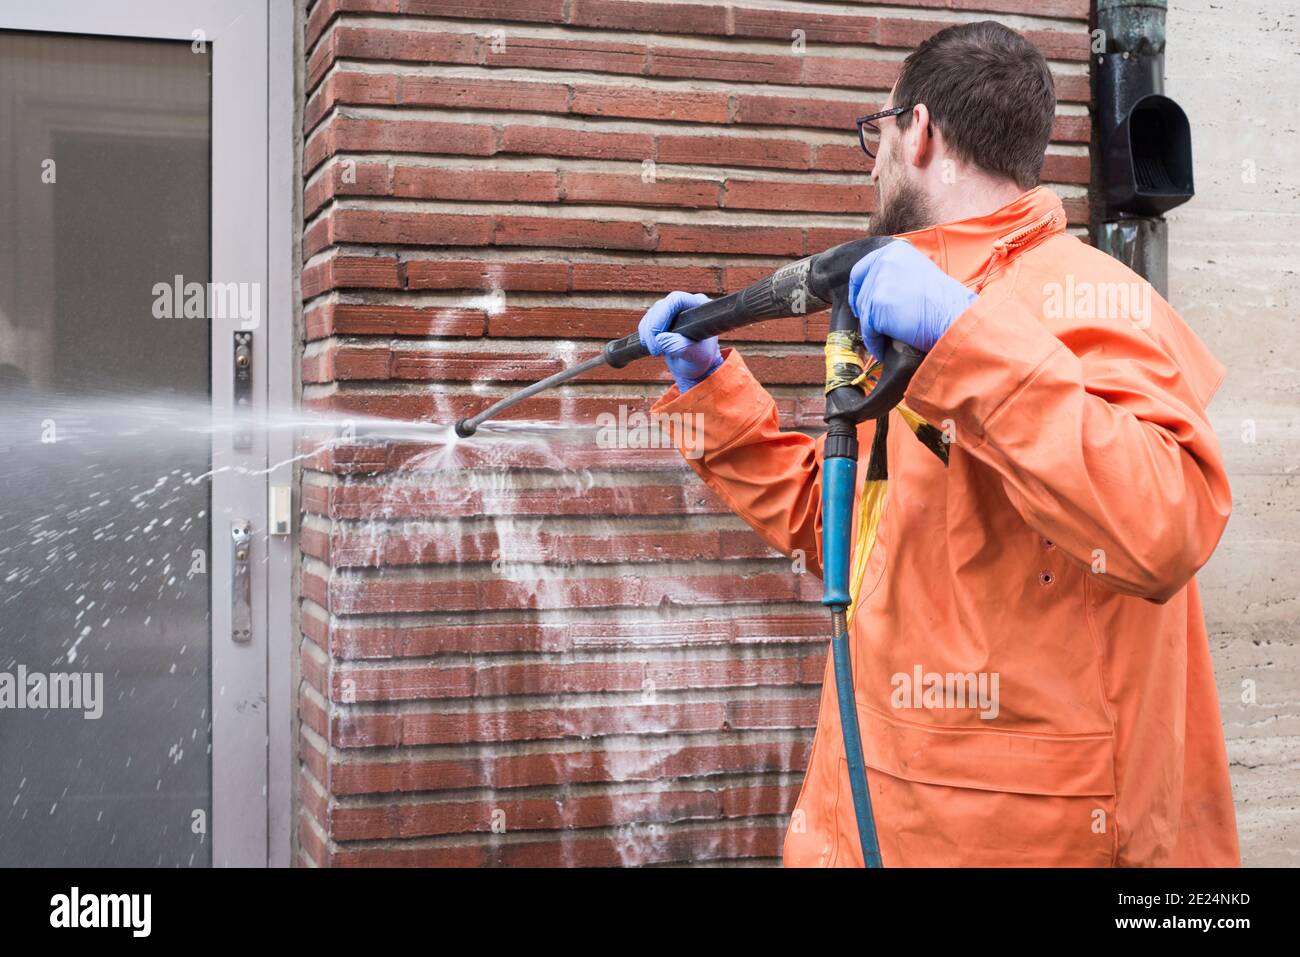 Man cleaning graffiti from wall Stock Photo